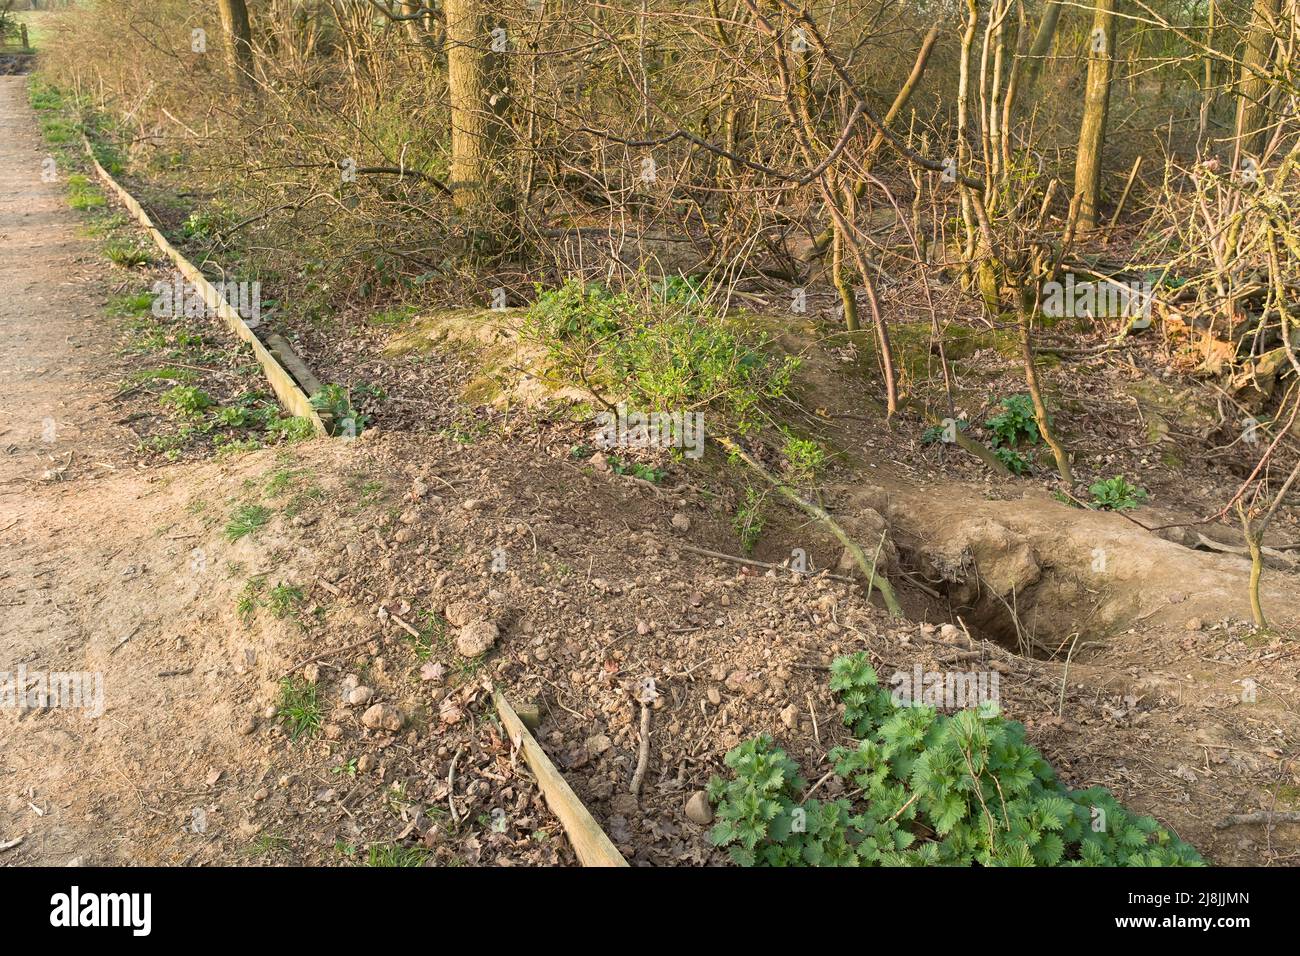 Badger sett damage, soil erosion and heap from a burrow or hole on the edge of a footpath in Buckinghamshire, UK Stock Photo